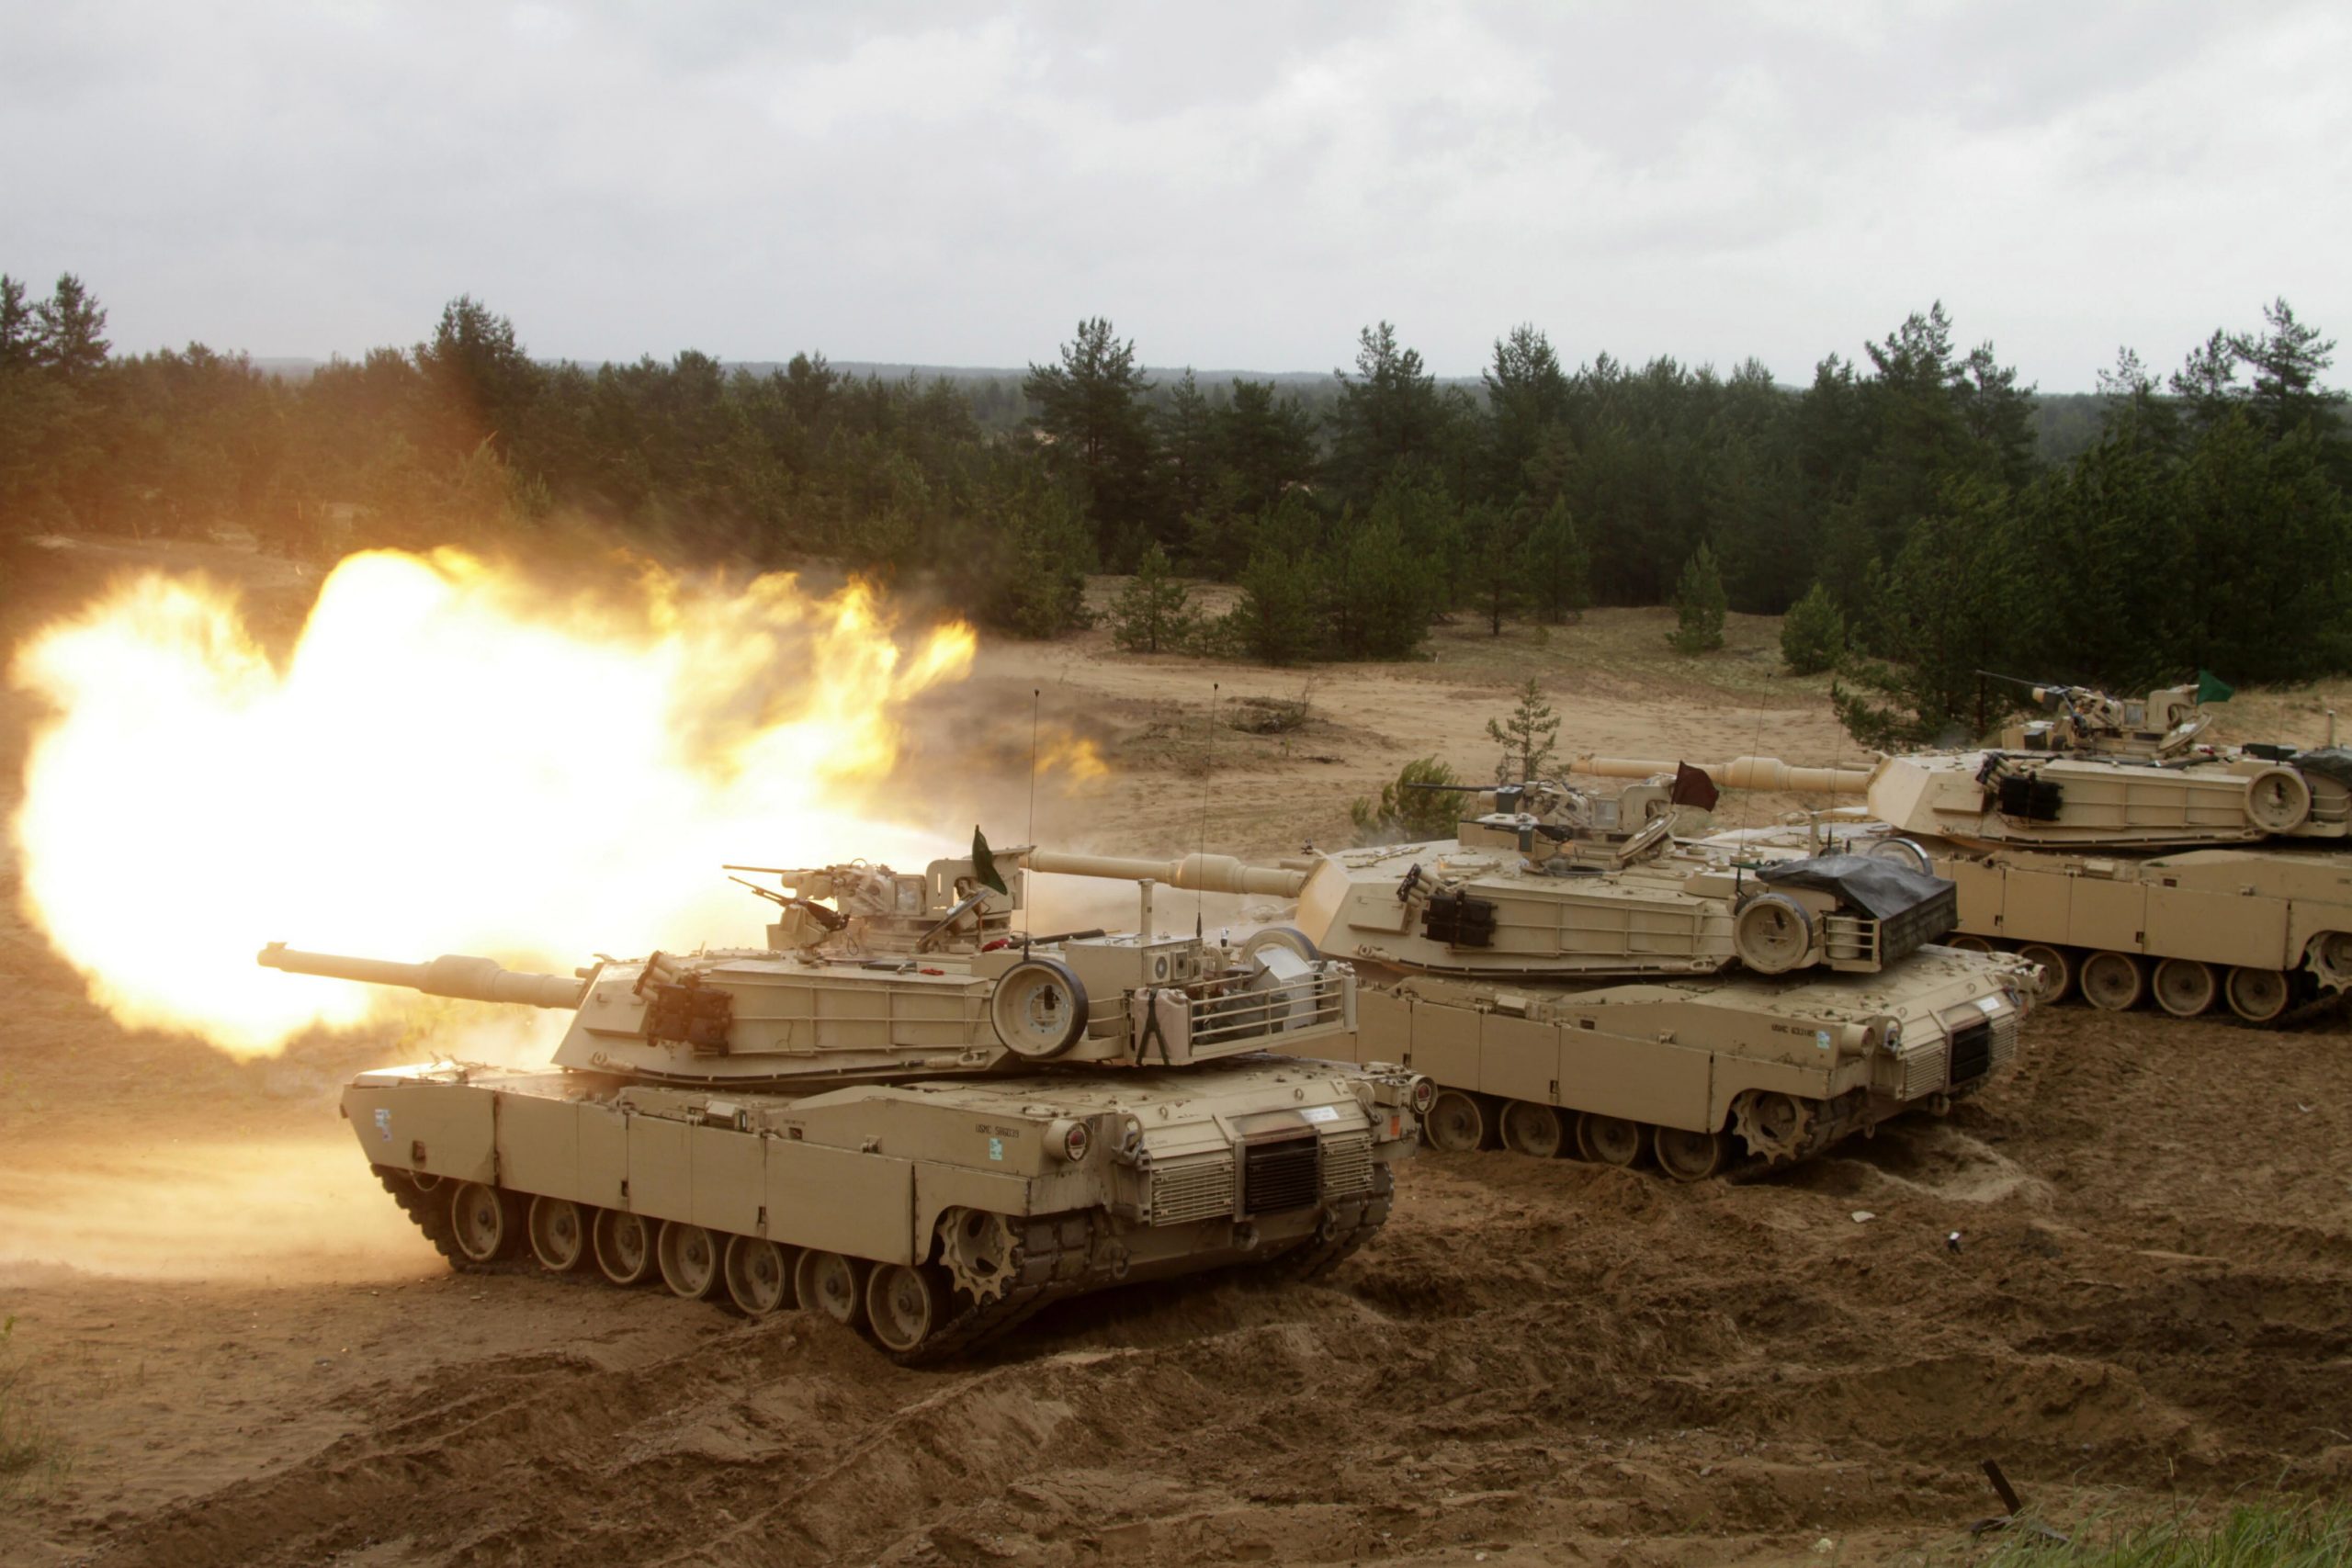 epa10429121 (FILE) - A US Army Abrams tank fires during the Saber Strike military exercises in Adazi military training area, Latvia, 11 June 2016 (reissued 25 January 2023). The US are to send some 31 of their M1 Abrams tanks to the Ukraine, US President Biden announced on 25 January 2023. The annnouncement comes the same day Germany cleared the way for deliveries of German-made Leopard 2 tanks to the Ukraine. Russian troops entered Ukraine territory on 24 February 2022, starting an armed conflict that has provoked destruction and a humanitarian crisis.  EPA/VALDA KALNINA *** Local Caption *** 52817165